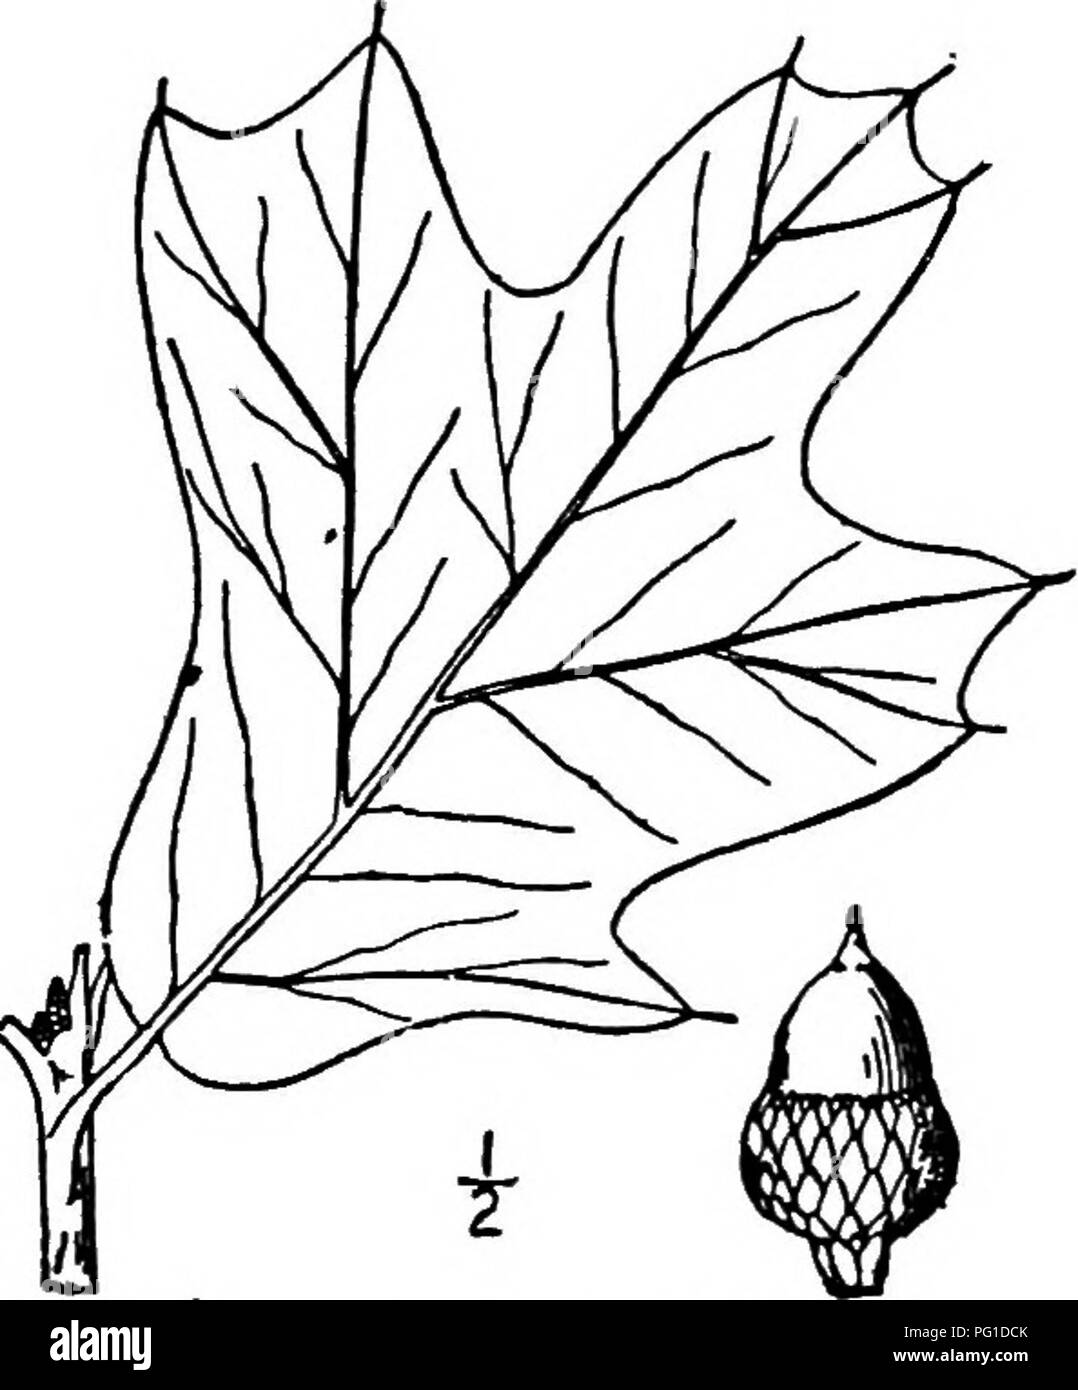 . North American trees : being descriptions and illustrations of the trees growing independently of cultivation in North America, north of Mexico and the West Indies . Trees. 298 The Oaks rowly wedge-shaped; they are thick and firm, deep dark green and shining above, pale gray and finely hairy with prominent midrib beneath, turning scarlet, yellow- brown before falling. The leaf-stalk is slender, almost romid, smooth or hairy, i to 2.5 cm. long. The flowers appear in April and May, when the leaves are about one half imfolded, the staminate in clustered slender, hairy catkins 5 to 10 cm. long;  Stock Photo